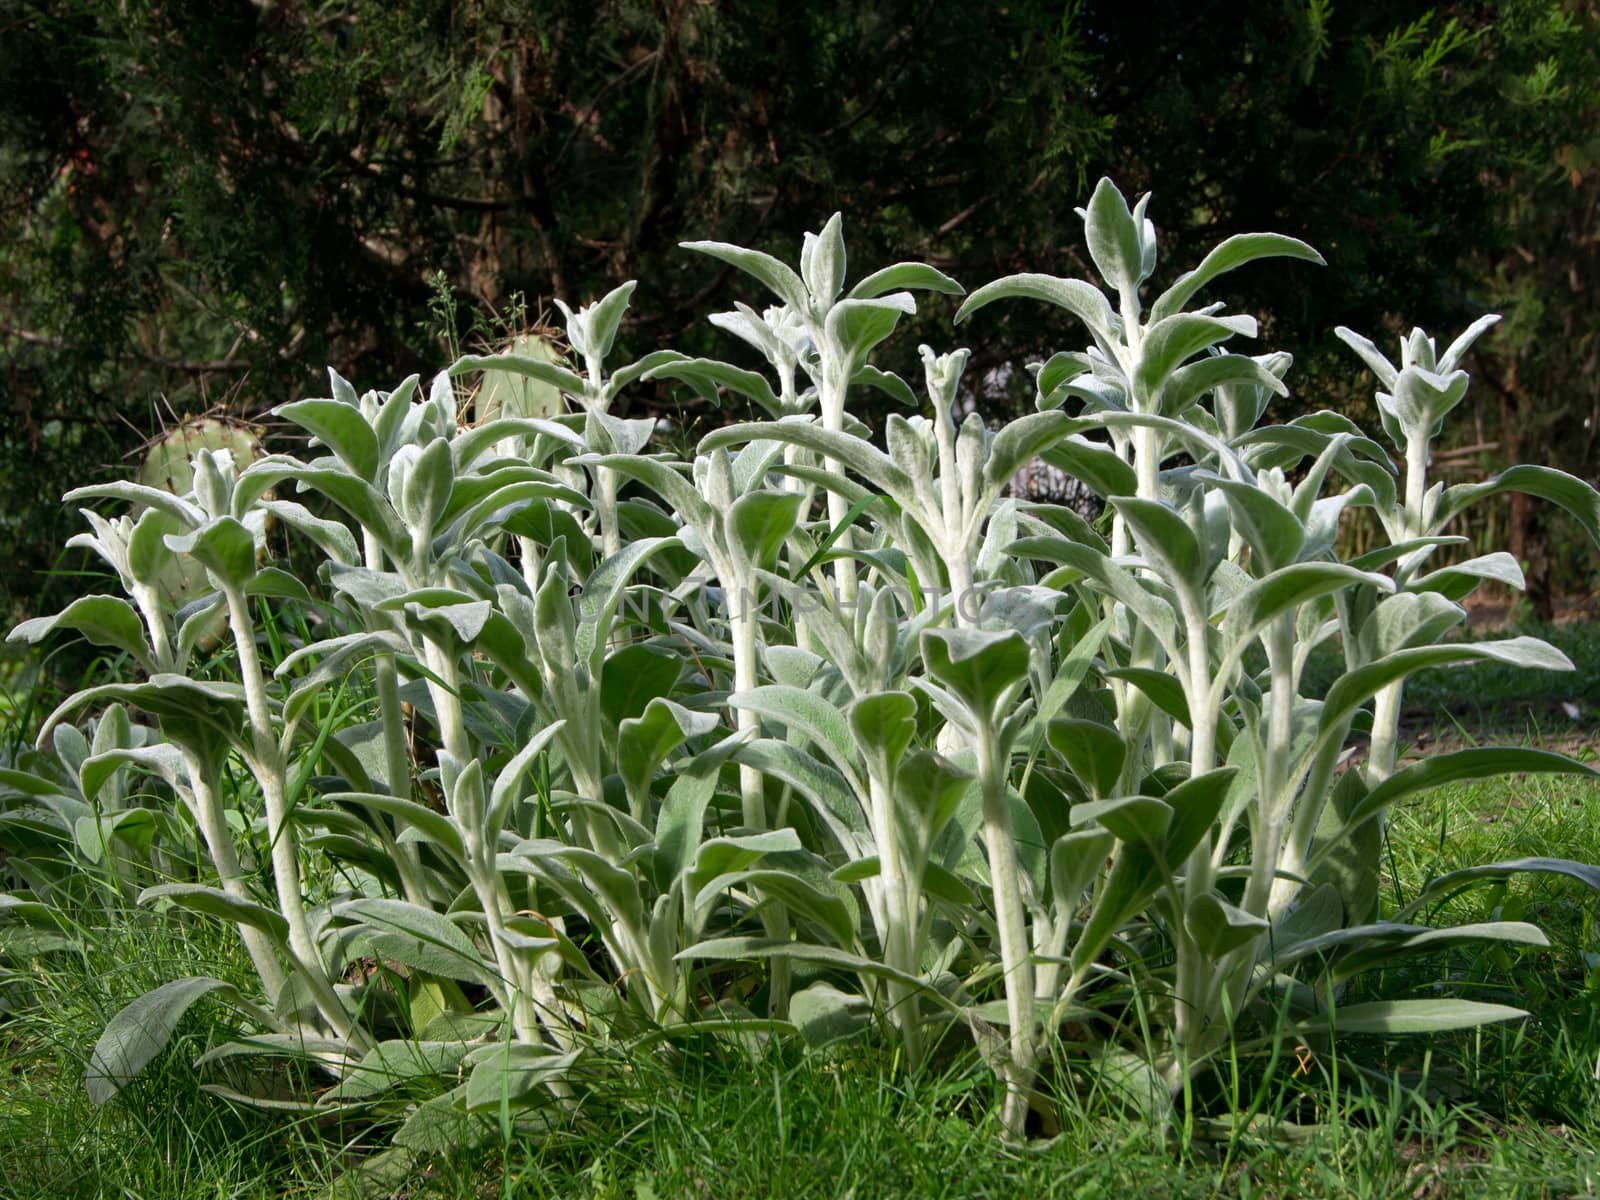 The woolly Stachys (Stachys byzantine) ornament in the garden.